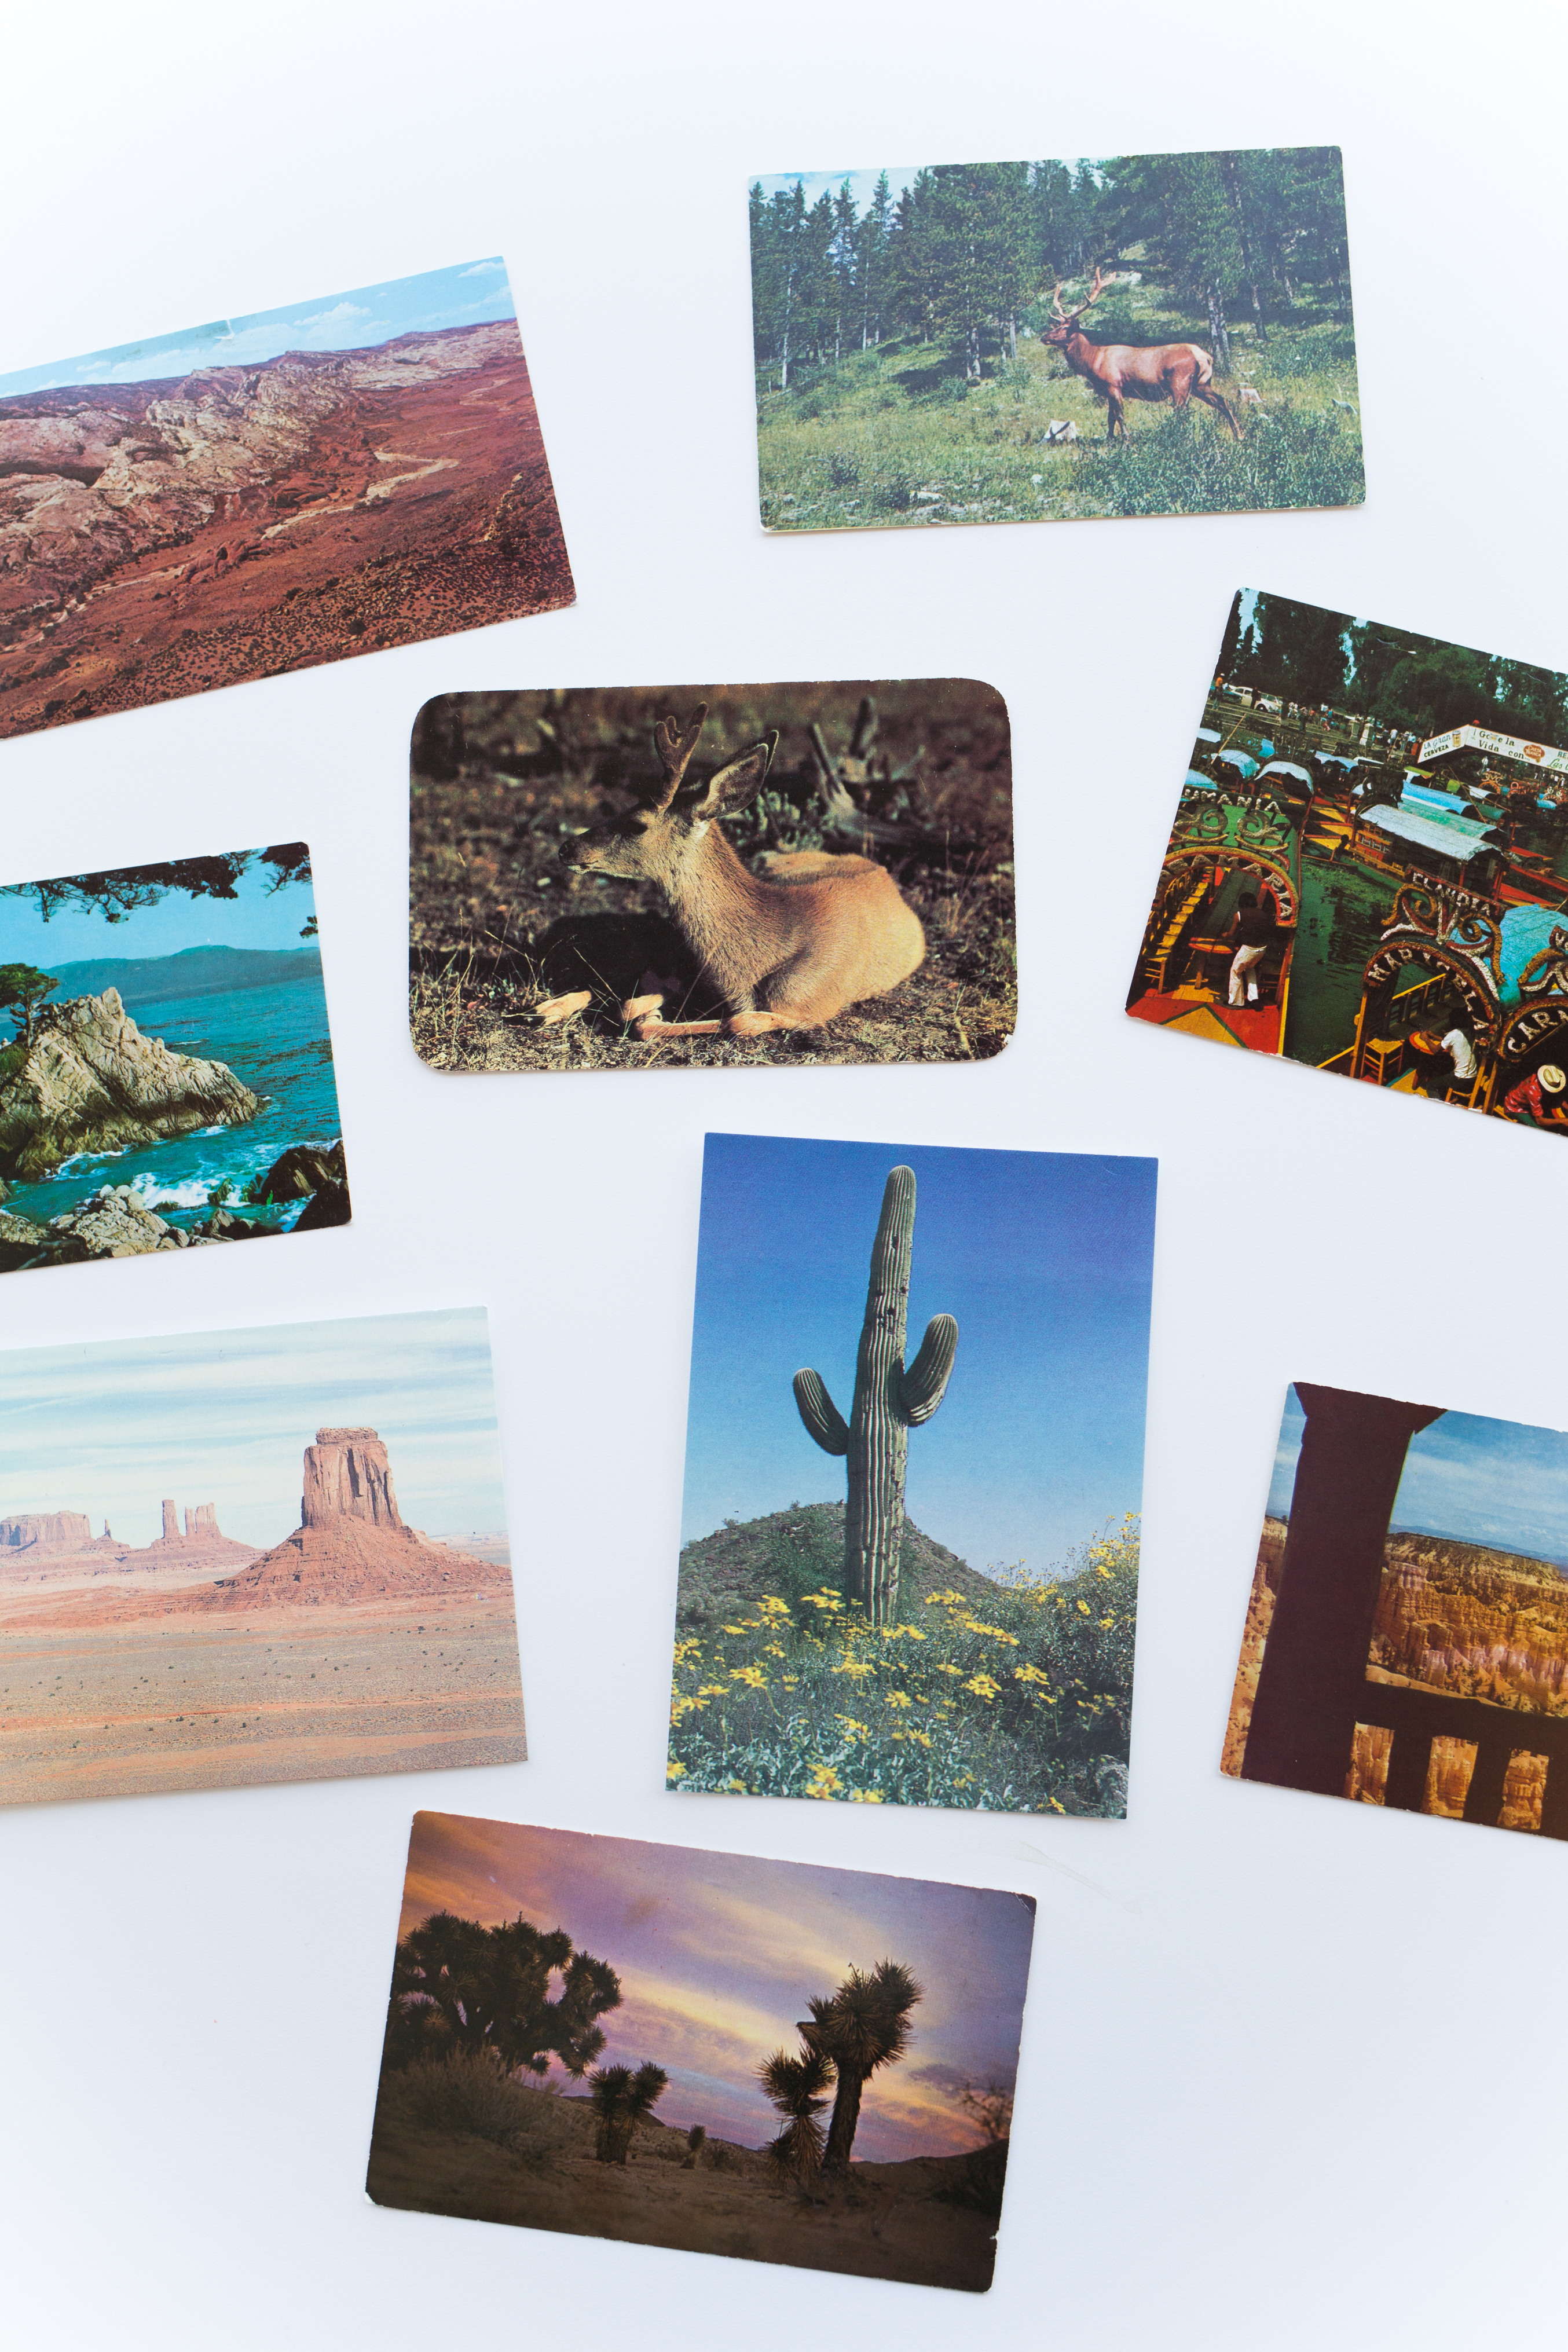 Sarah from Ludlow Kingsley shares desert postcards and answers a question about LA